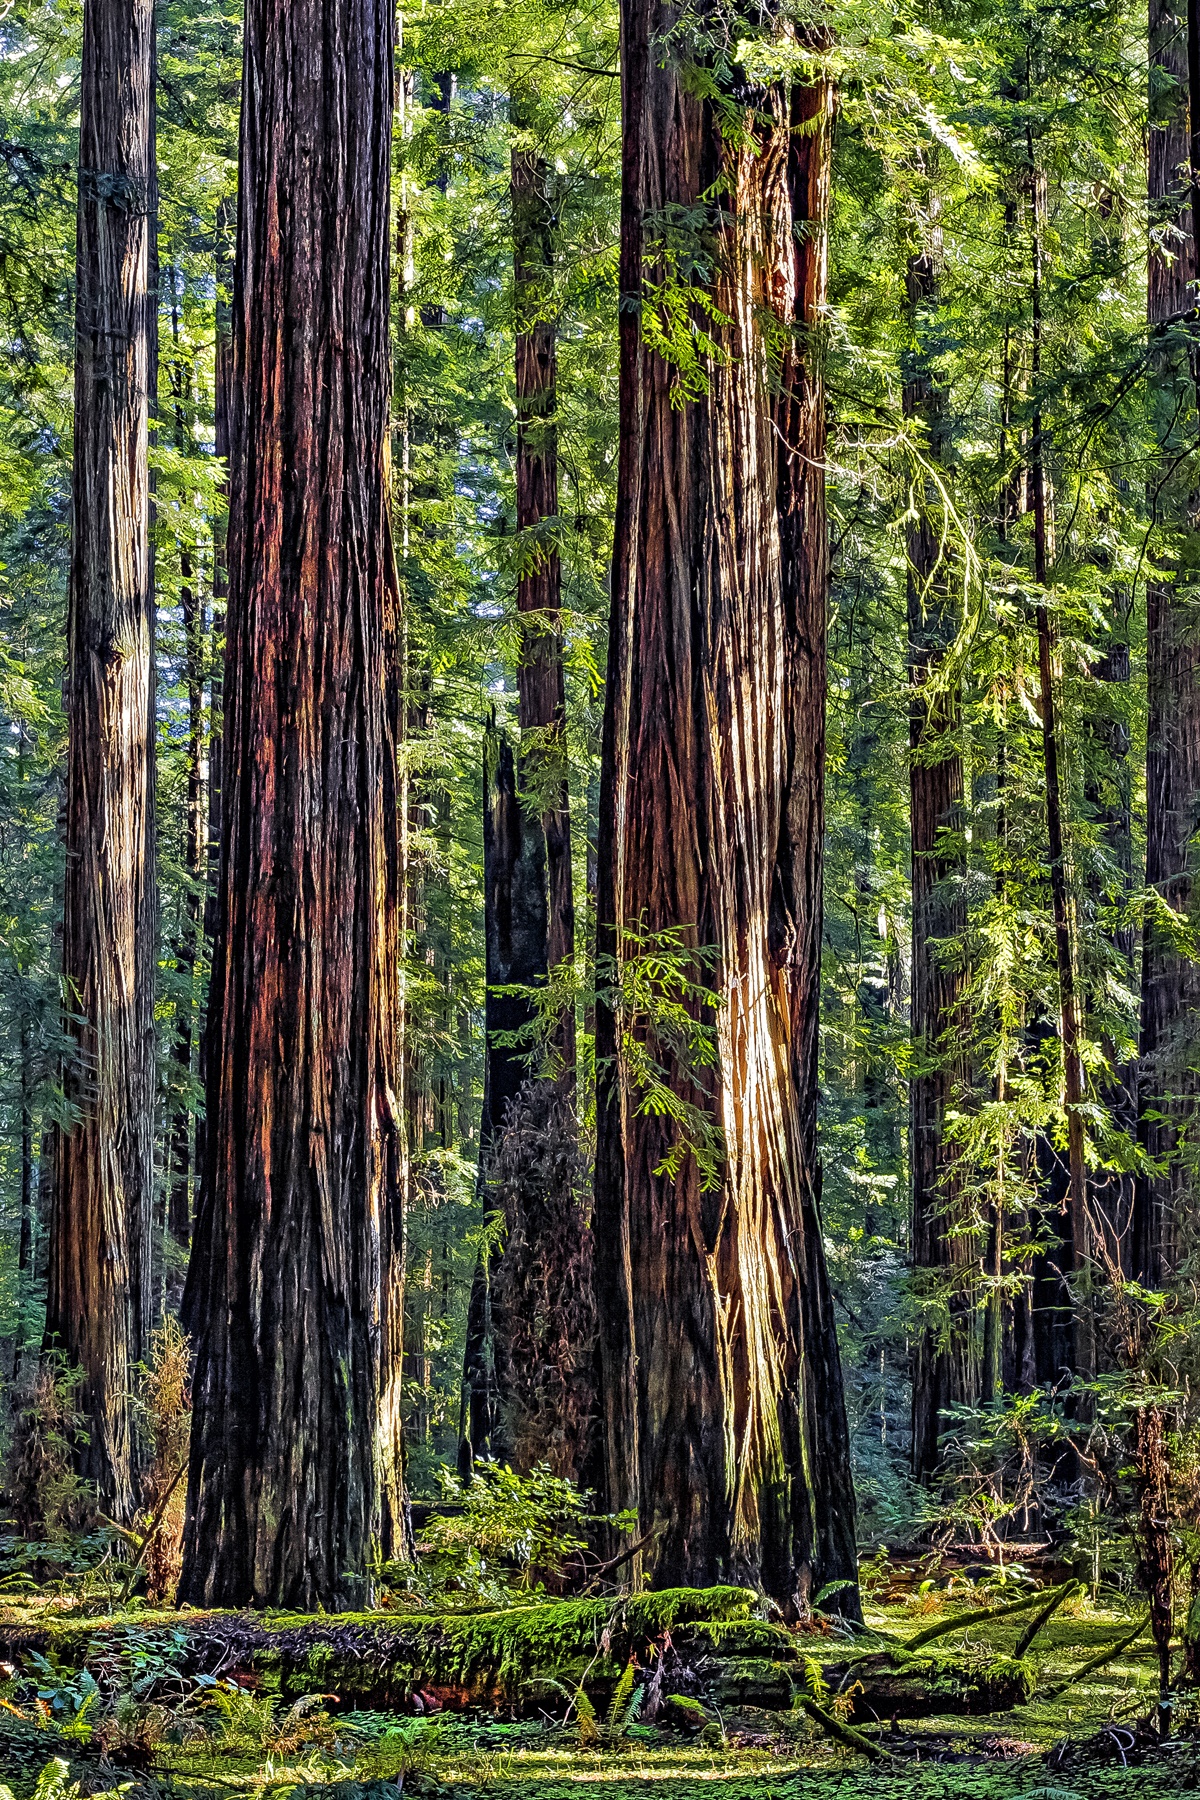 STANDING TALL - It’s difficult to describe the wonder and magnificance of the California redwoods. Even the photograph doesn’t begin to inspire like the real thing. If you haven’t seen them, I highly recommend the trip. You will be amazed.